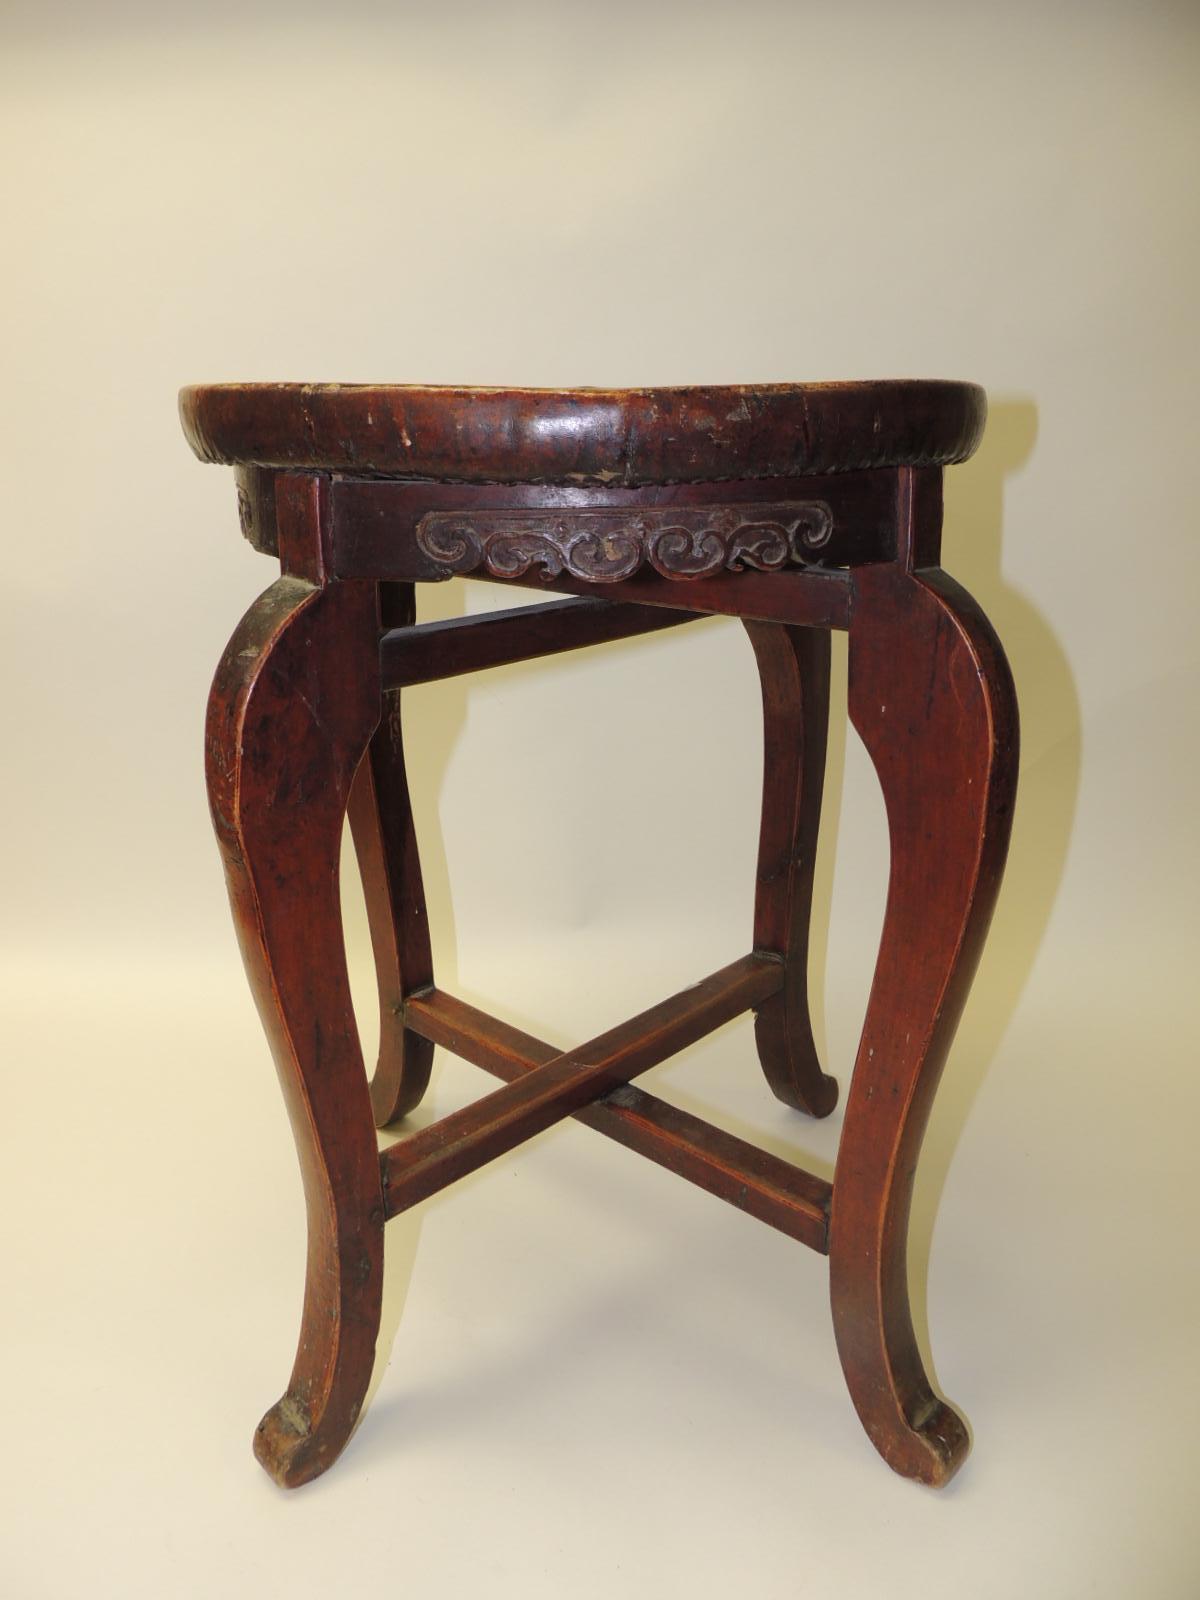 Hand-Crafted Round Asian Side Table or Stool with Carved Apron and Turned Wood Legs